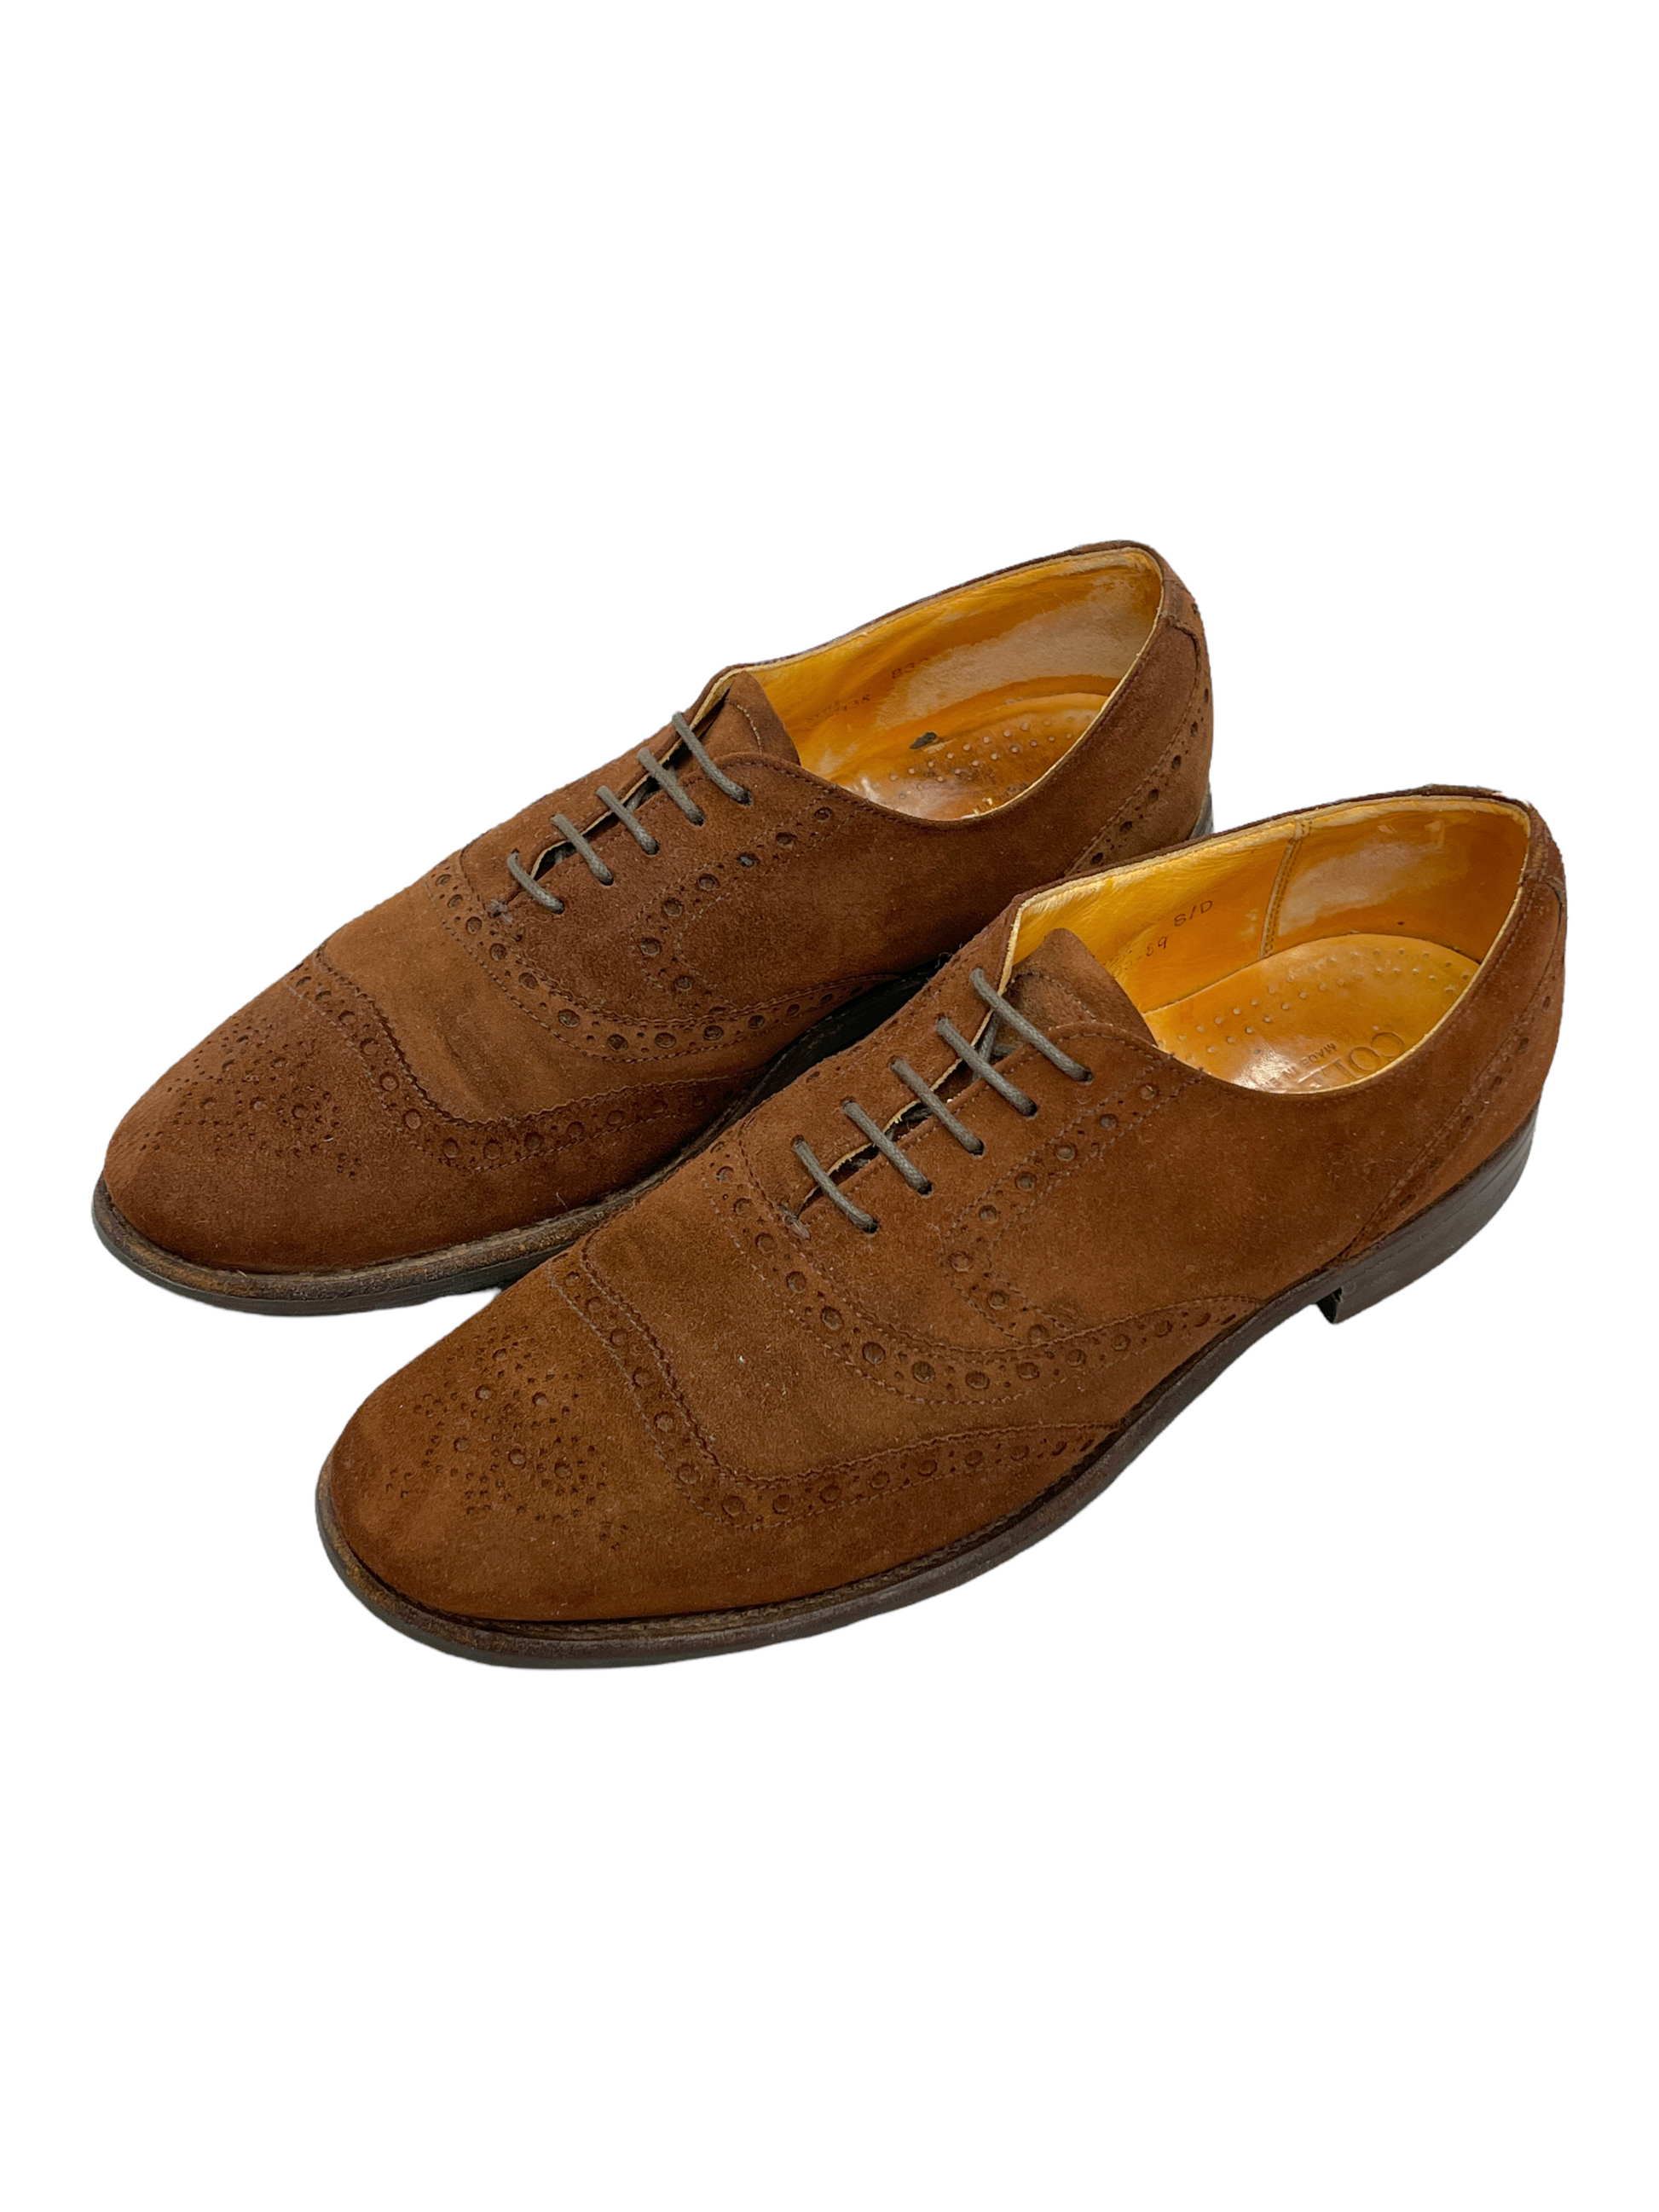 Cole Haan Brown Leather Oxford Dress Shoes 8 D US - Genuine Design Luxury Consignment for Men. Based in Calgary, Alberta, Canada.